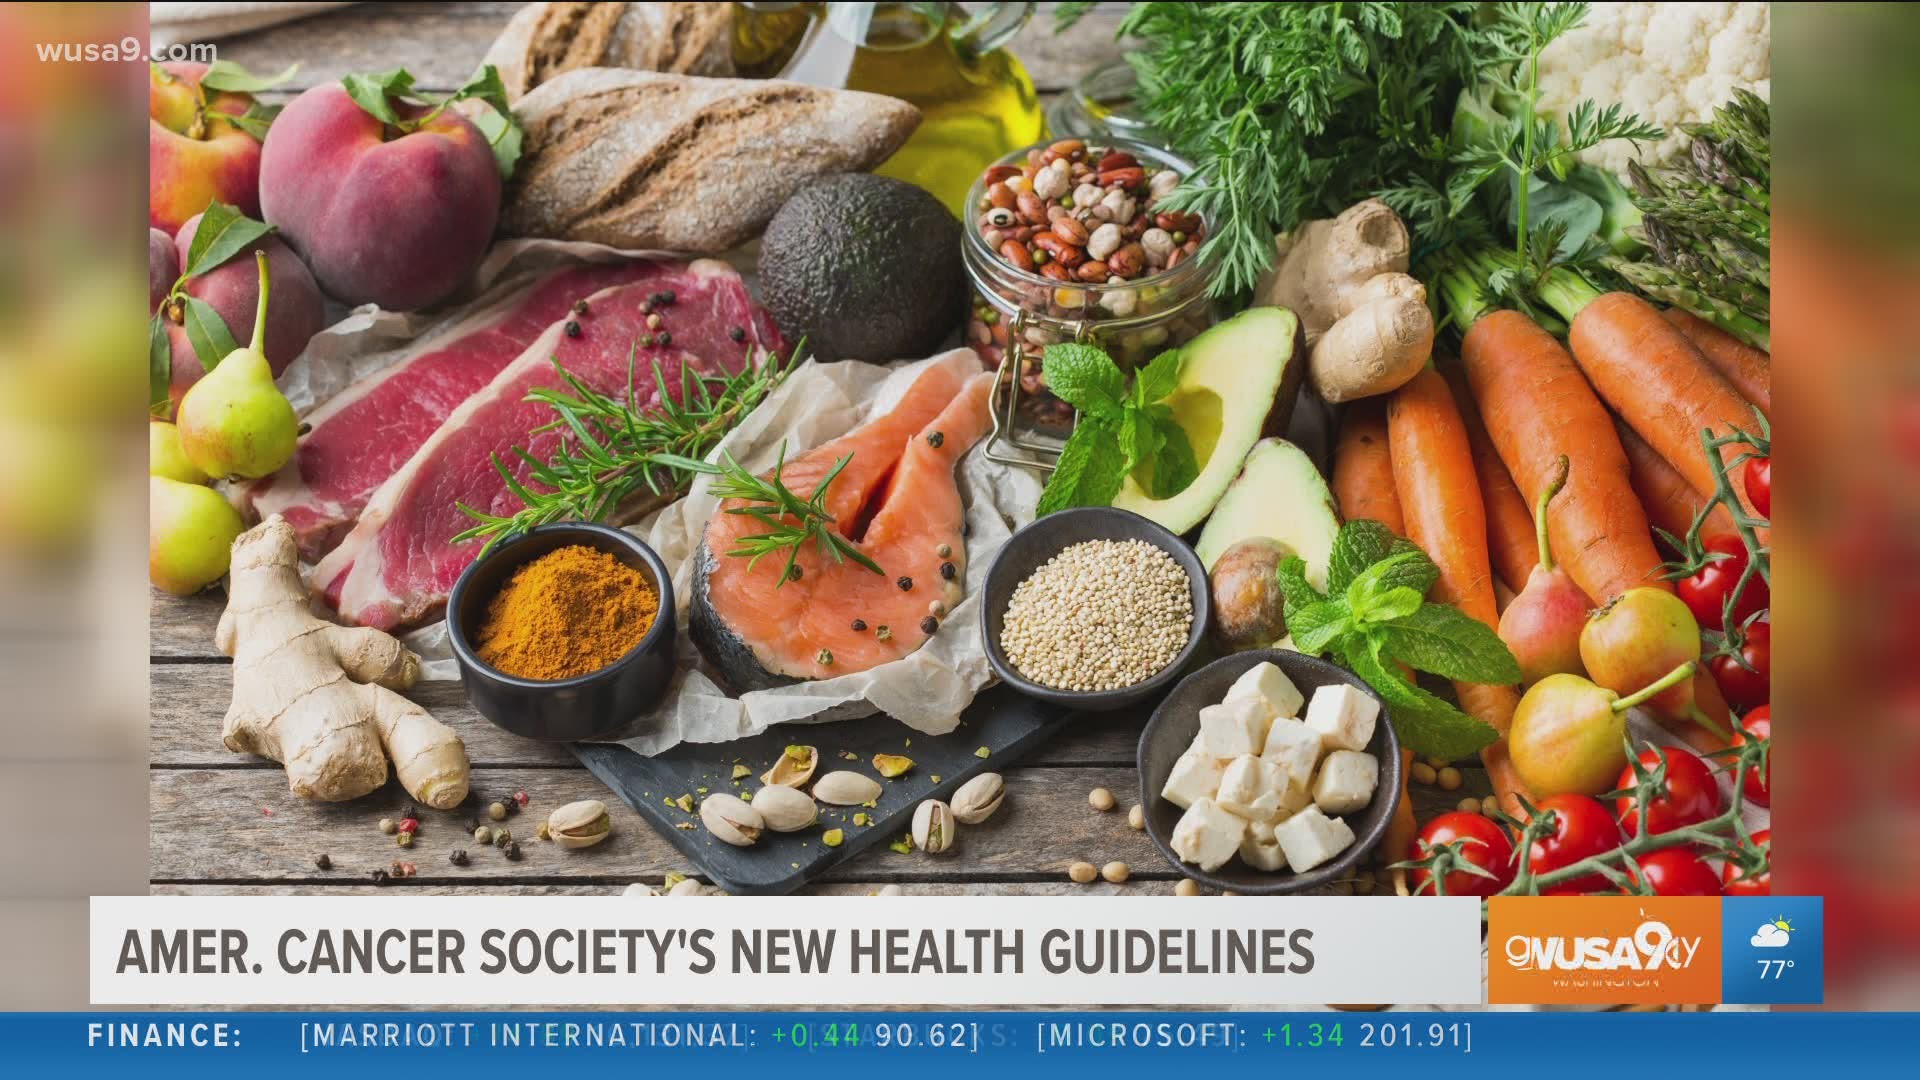 Dietitian Shelley Maniscalco talks about the recently released new guidelines for diet and physical activity from the American Cancer Society.